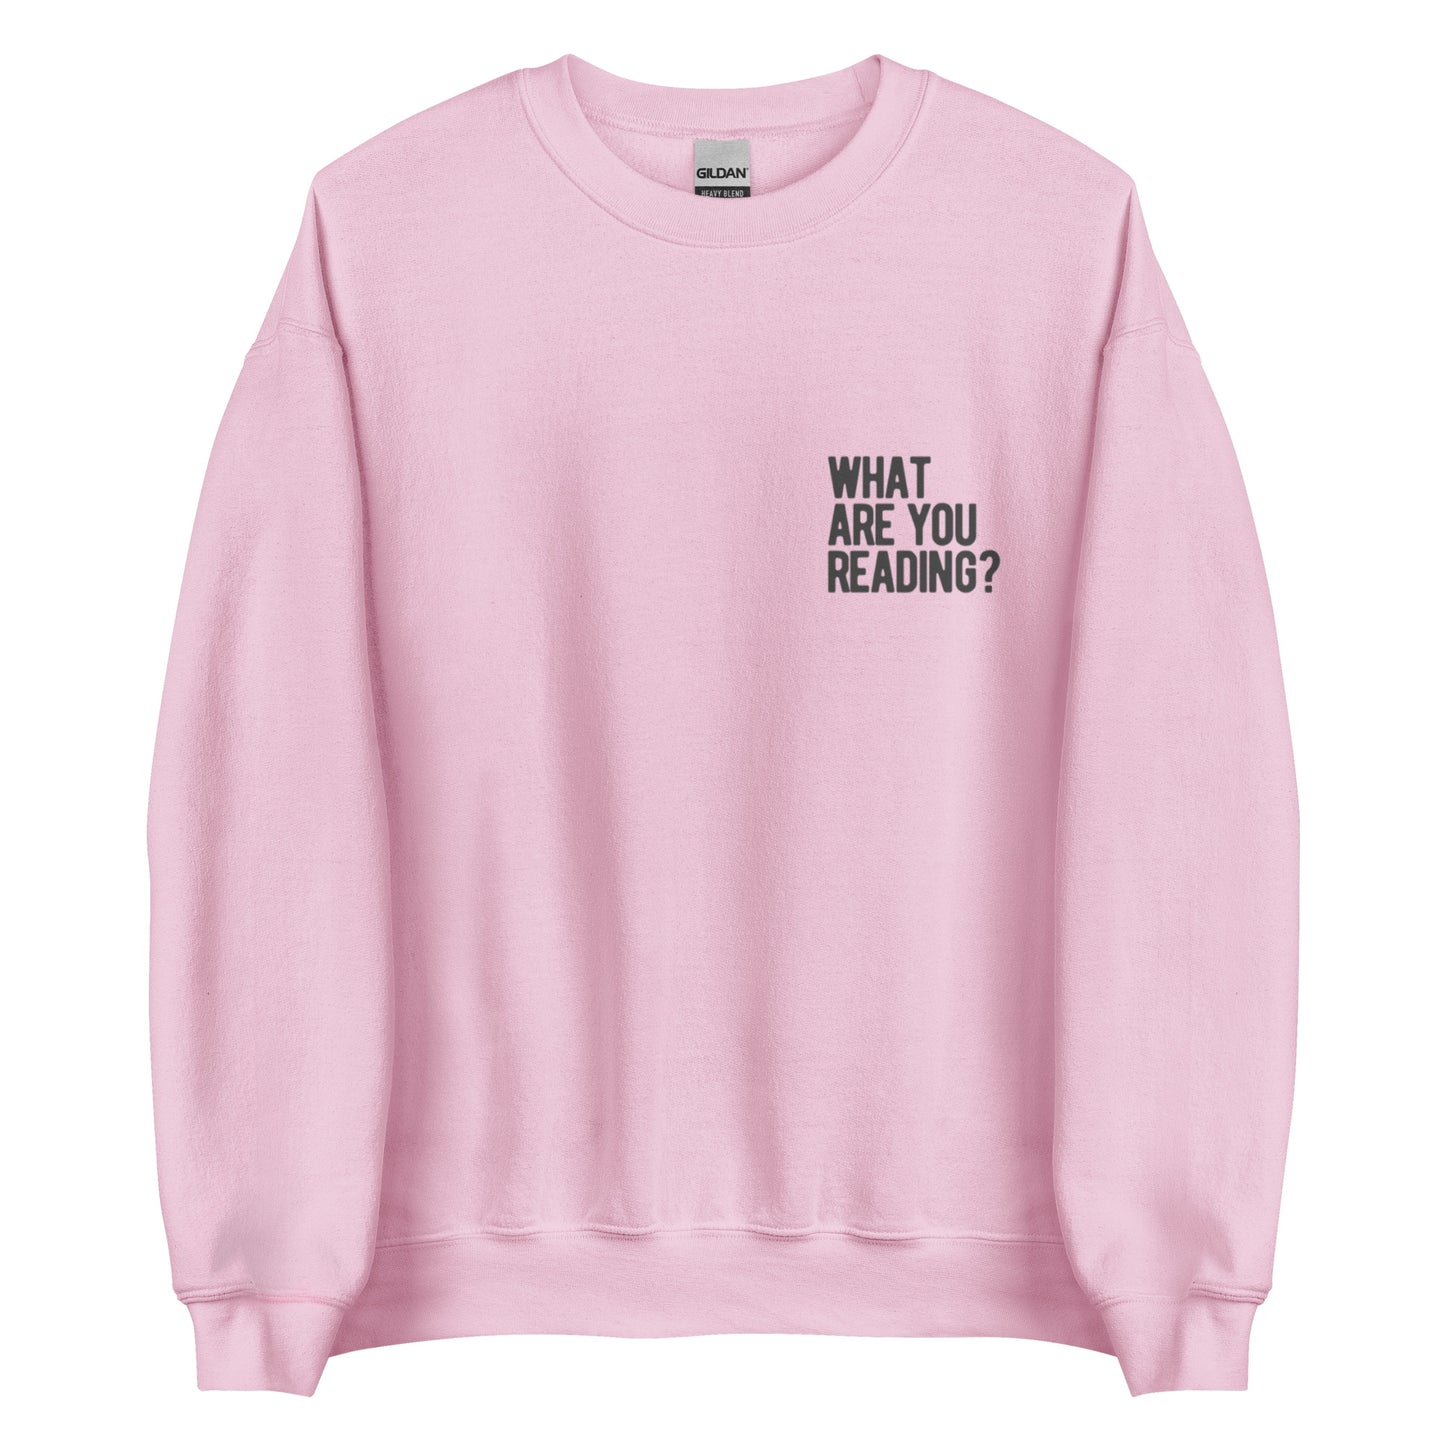 what are you reading/PS logo sweatshirt